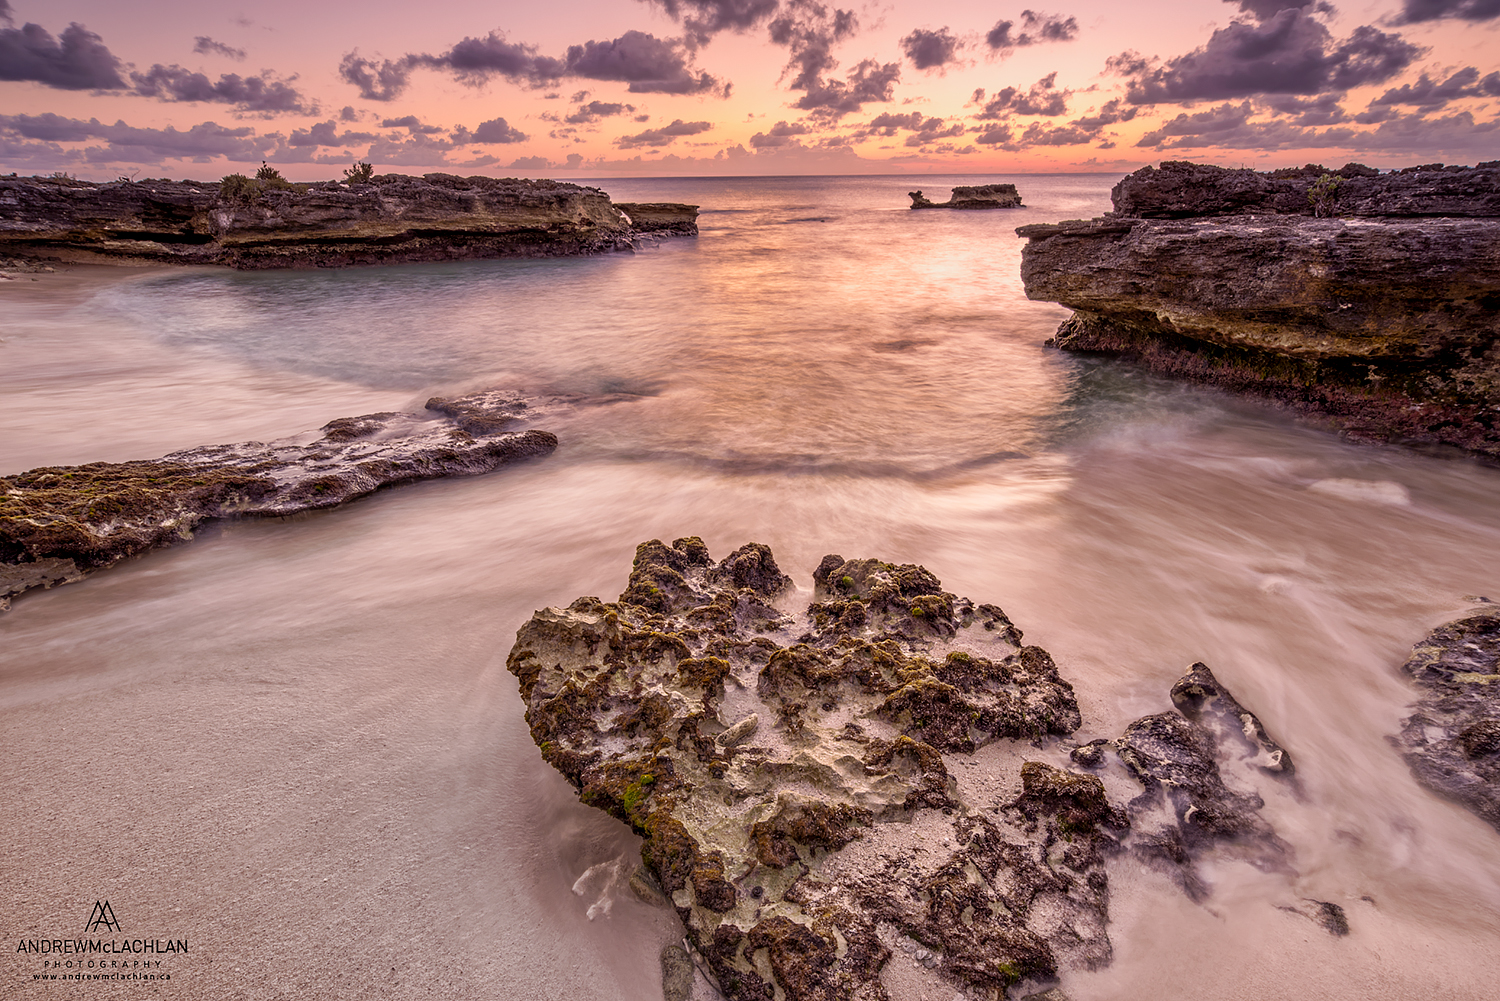 Sunset at Smiths Cove, Grand Cayman, British West Indies